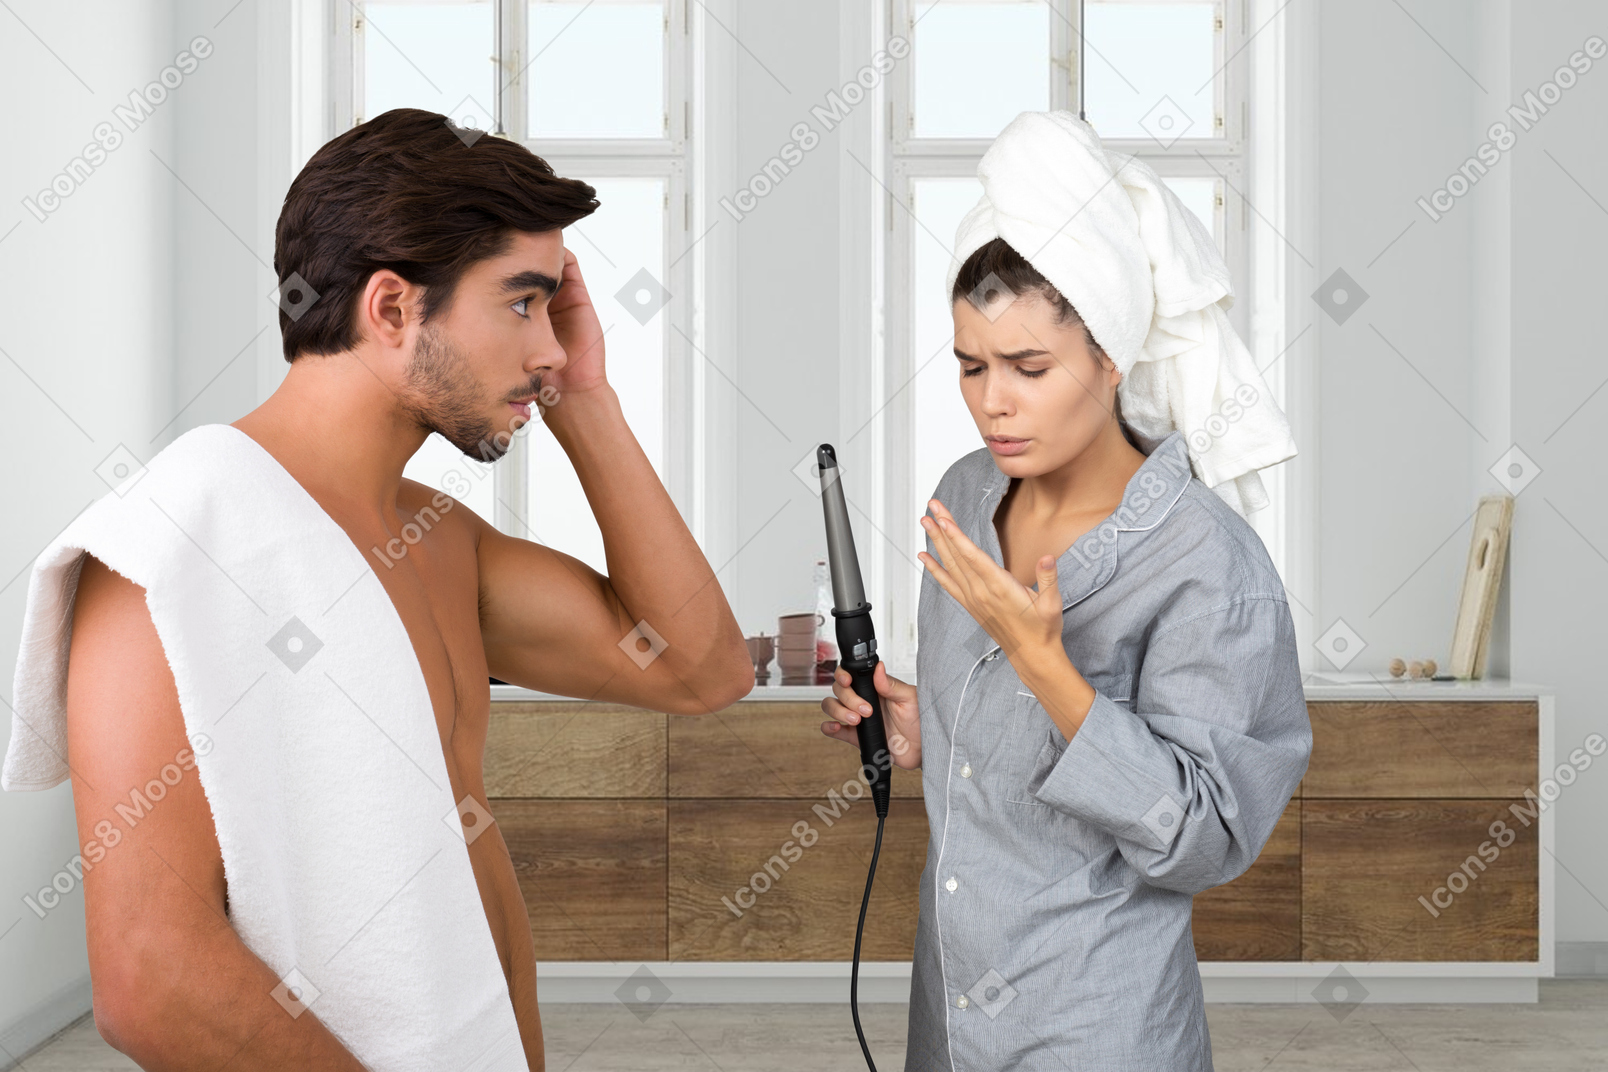 Topless man with towel on his shoulder standing next to woman blowing burned finger in bathroom